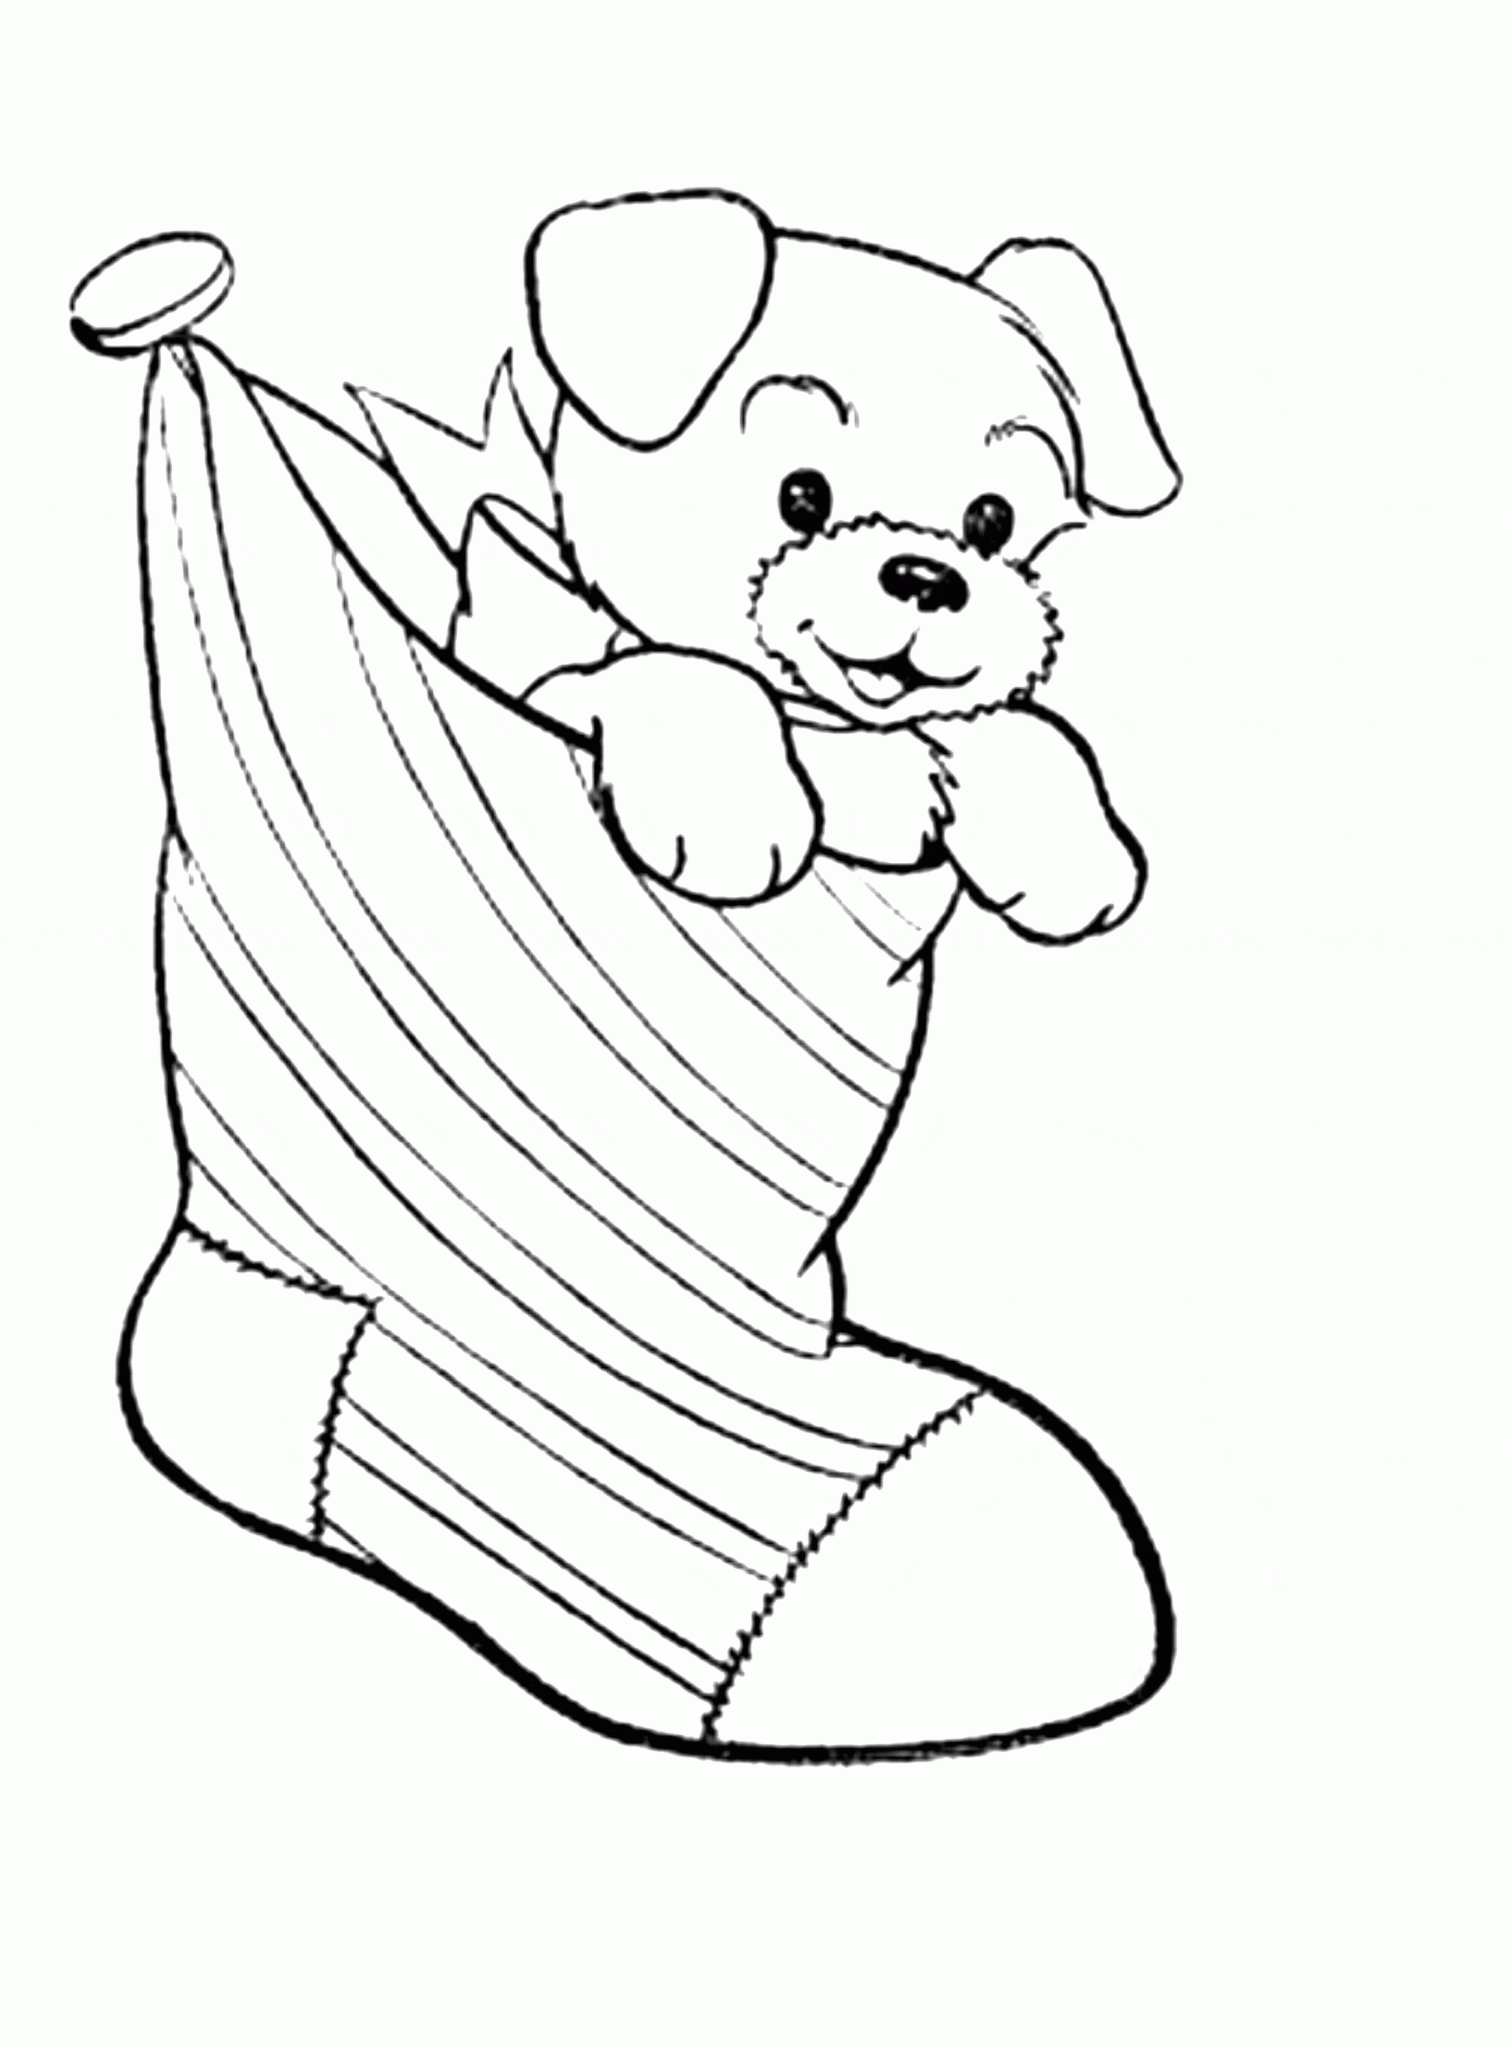 puppy colouring pages free printable puppies coloring pages for kids puppy pages colouring 